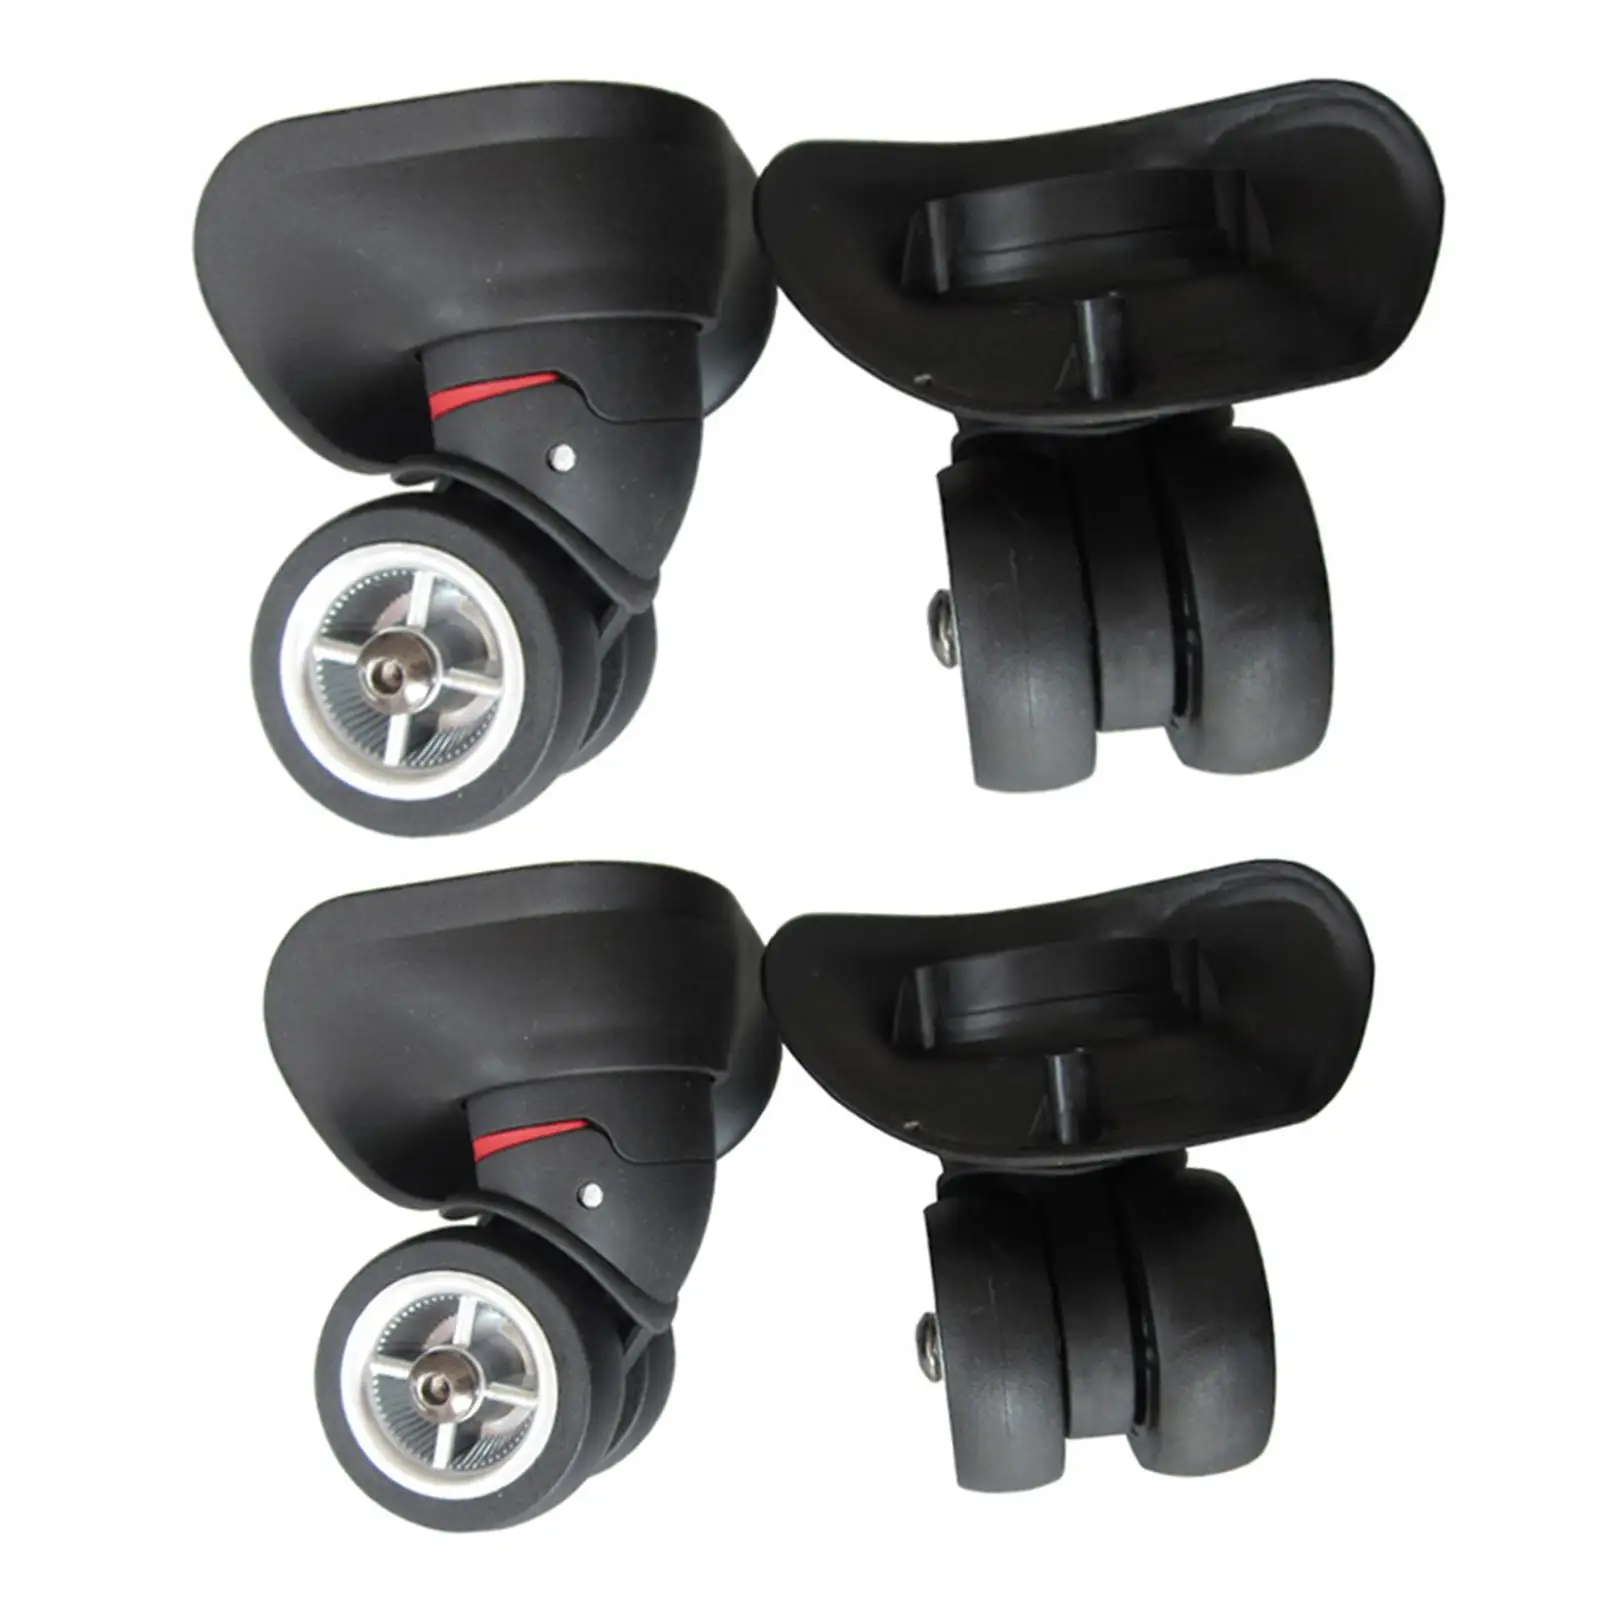 

A08 Luggage Wheel Replacement Universal Swivel Casters Wear Resistant Load Bearing Luggage Mute Wheel Suitcase Repair